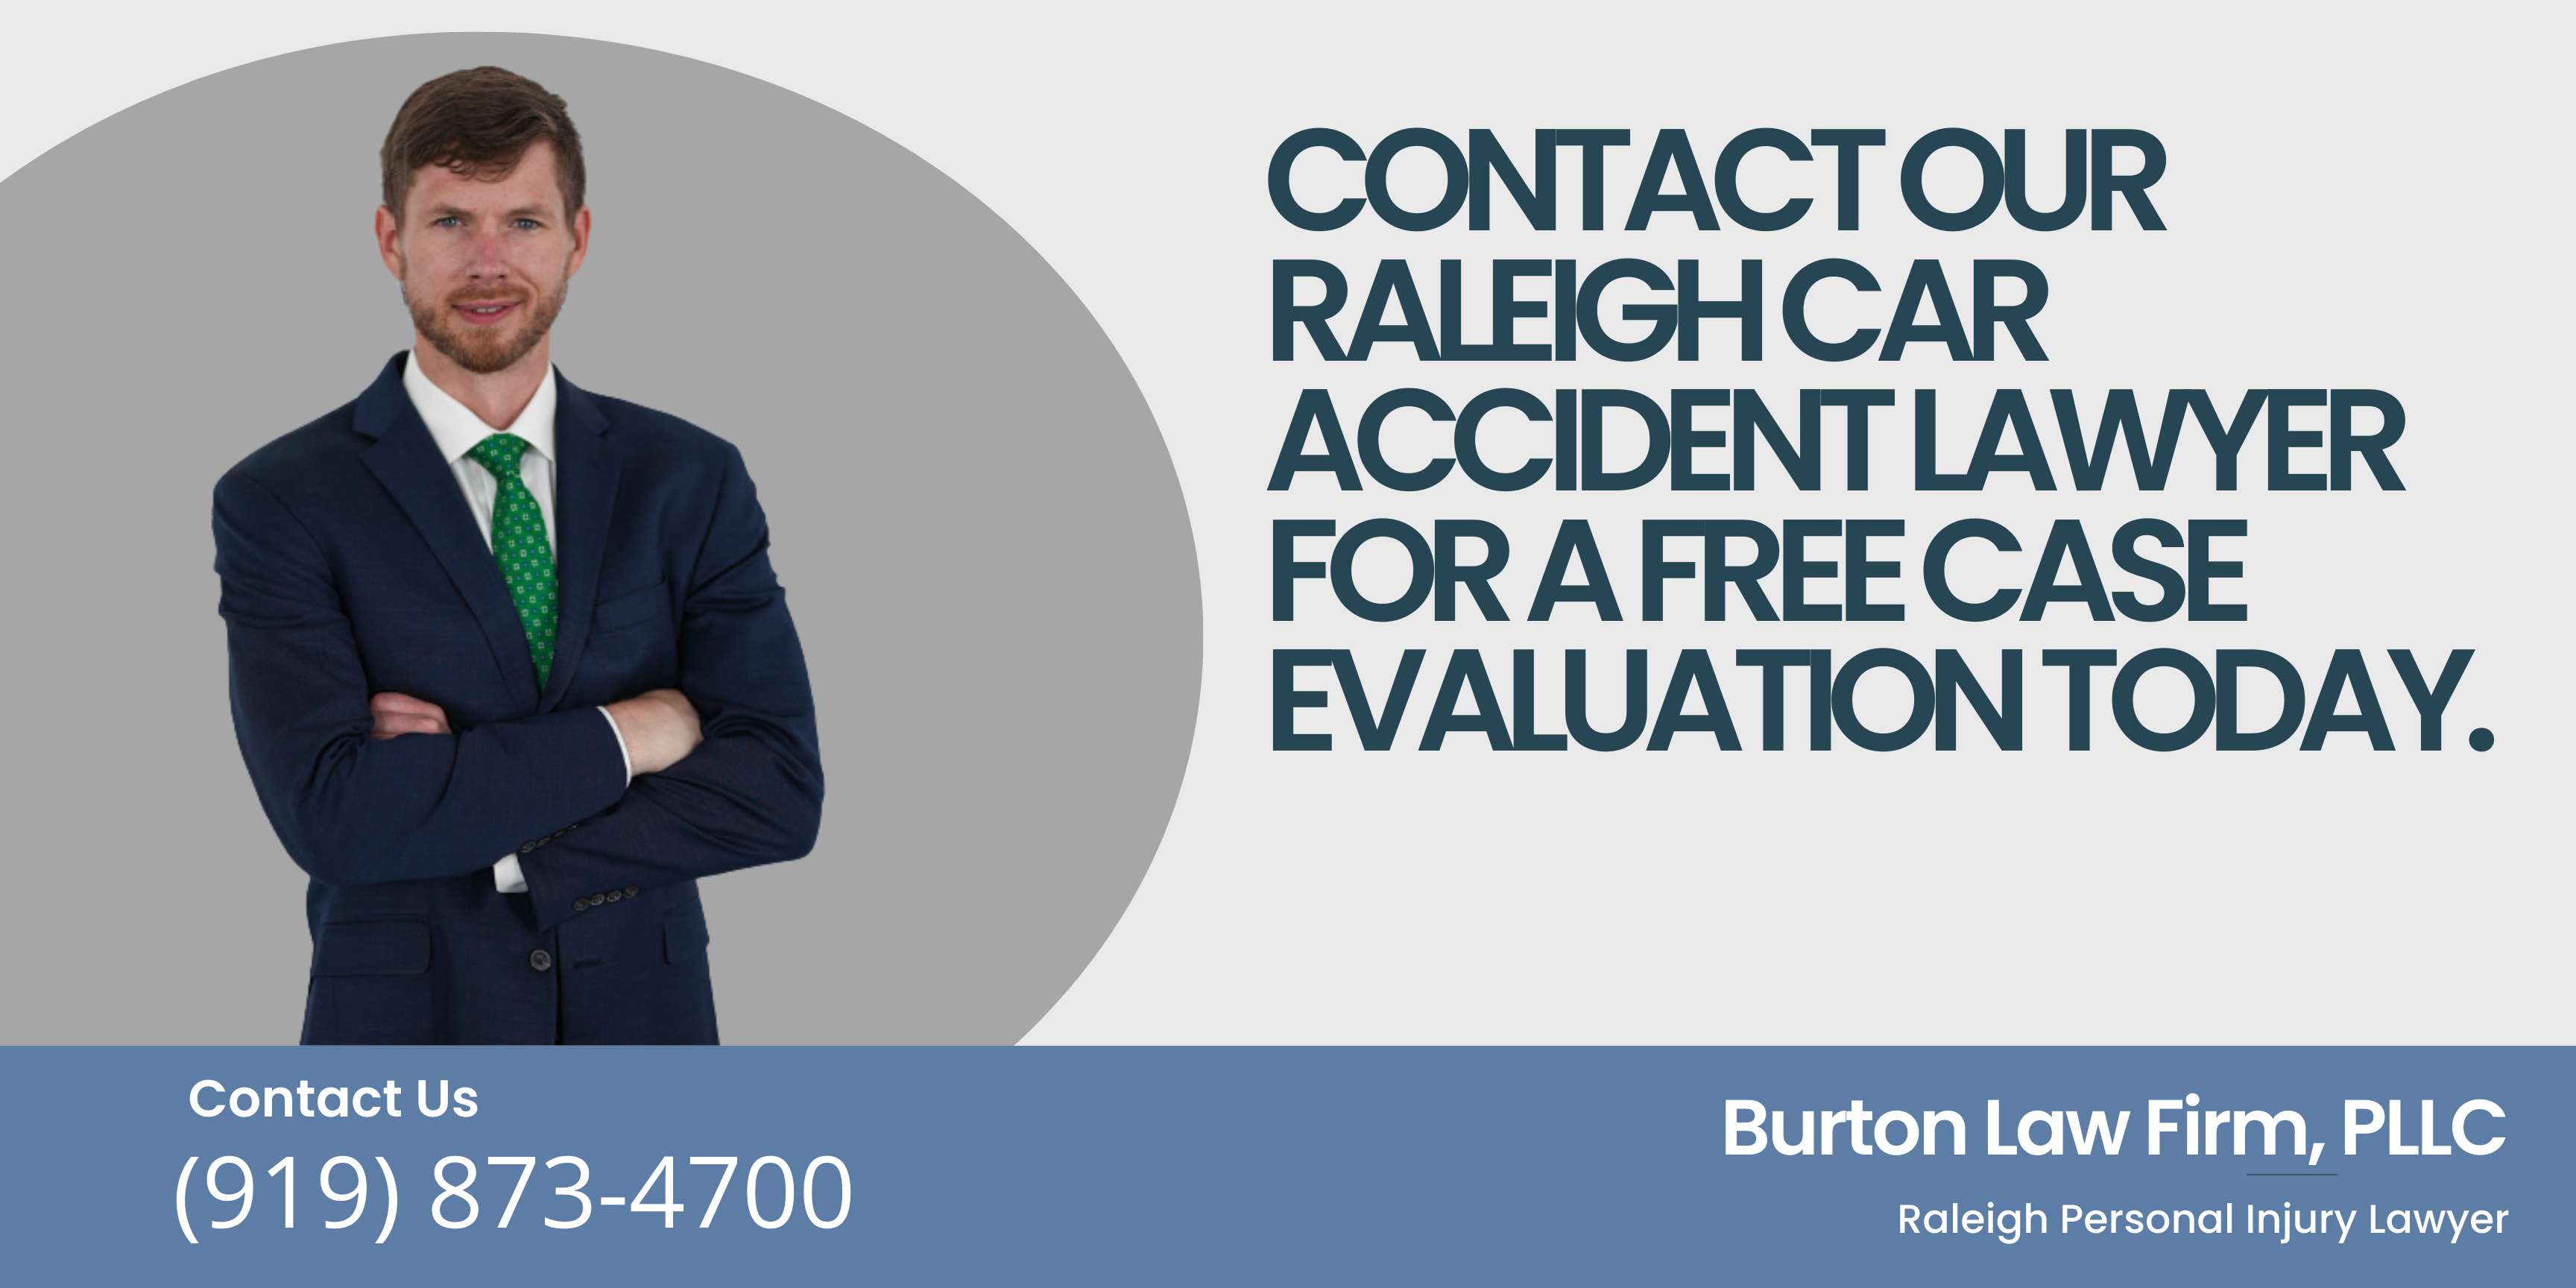 Contact our Raleigh Car Accident Lawyer